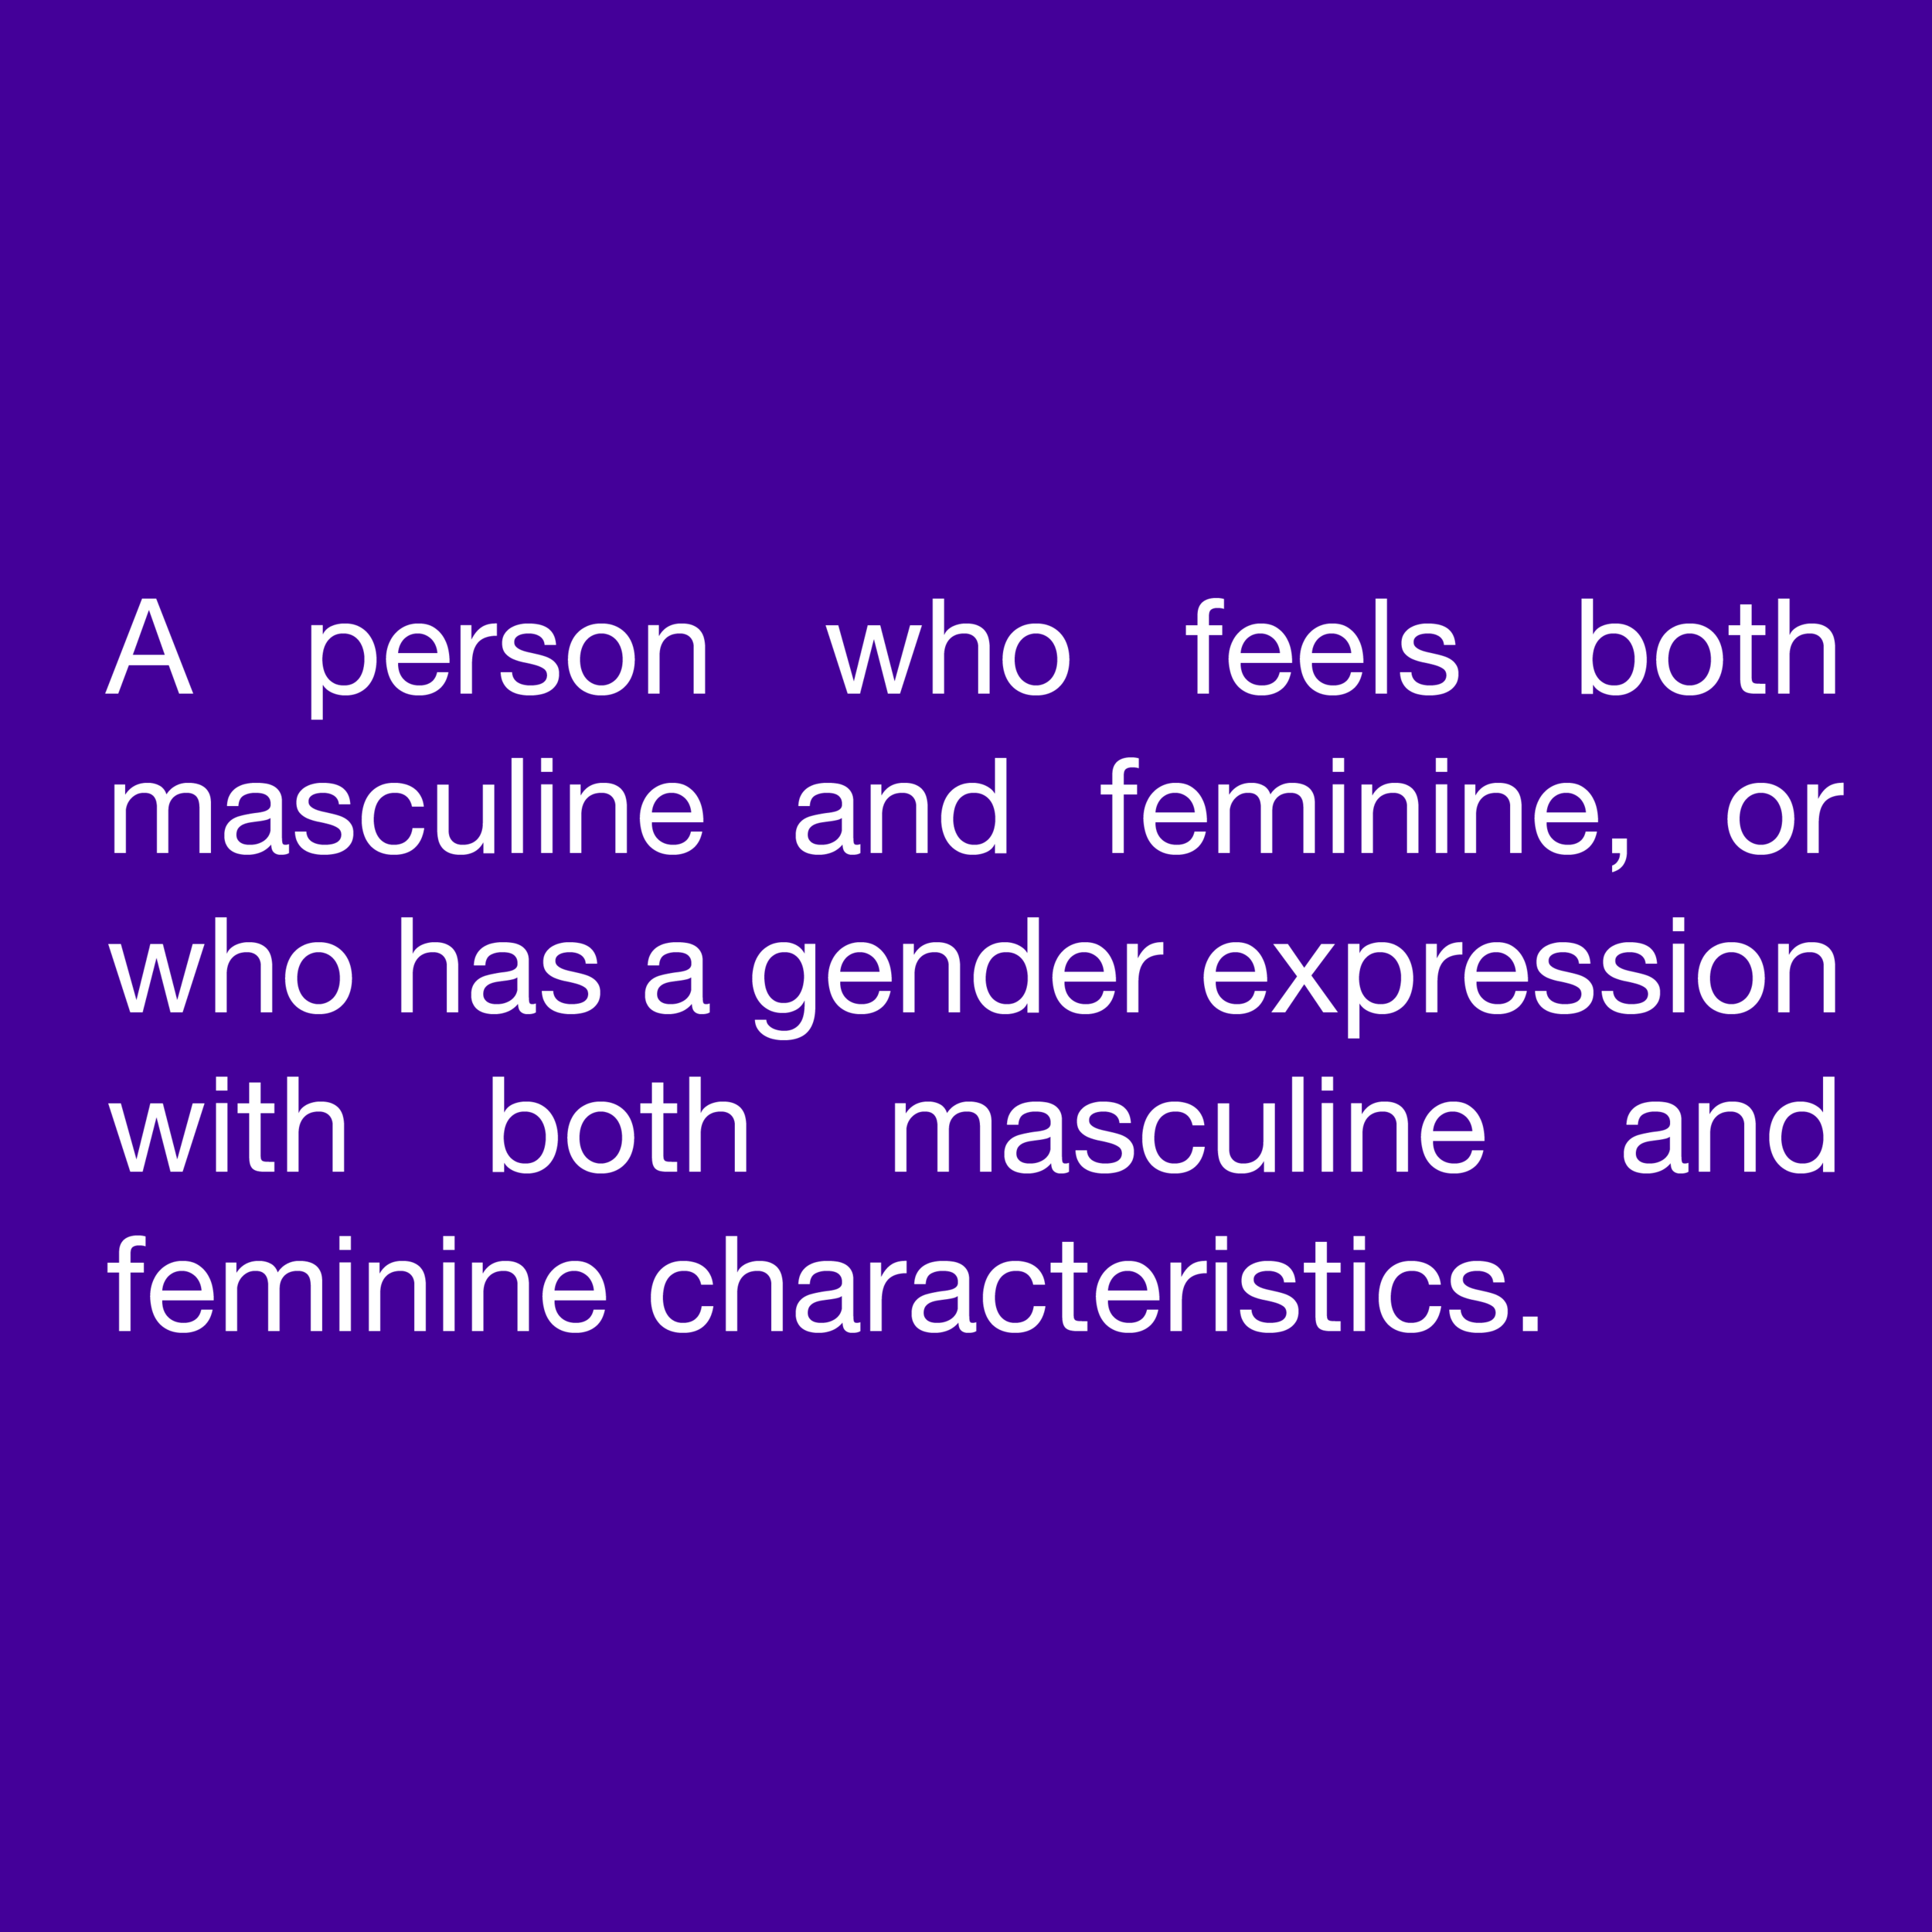  A person who feels both masculine and feminine, or who has a gender expression with both masculine and feminine characteristics. 